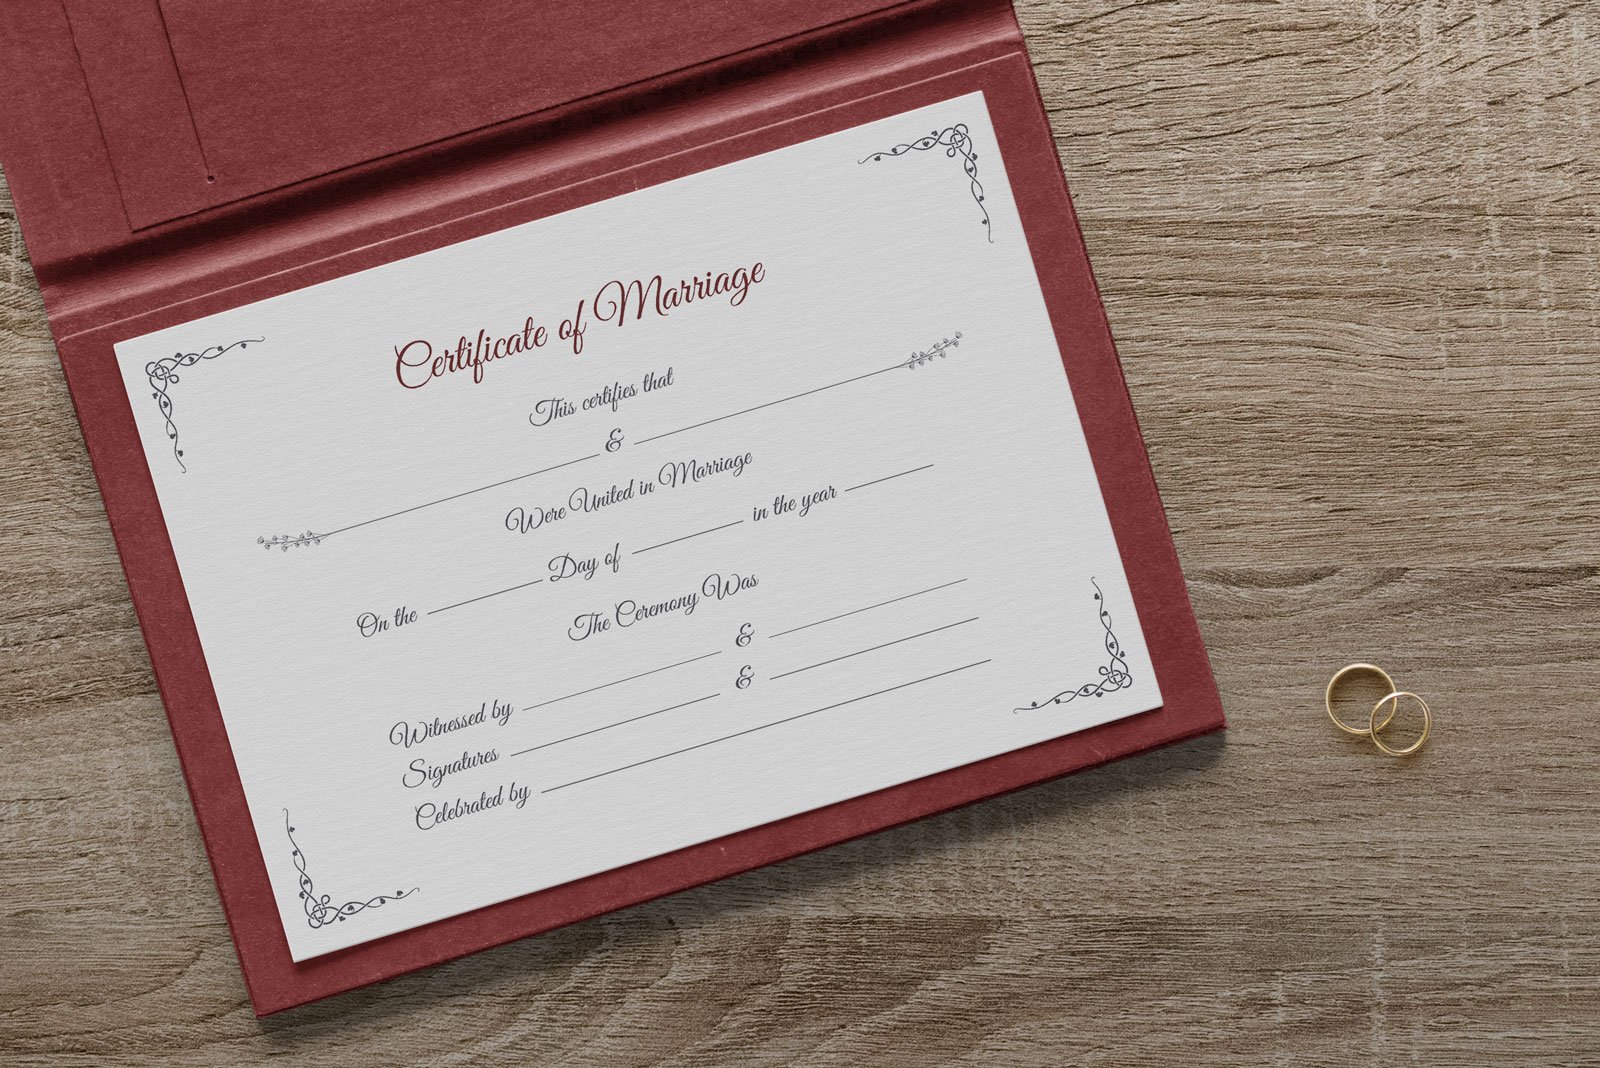 Free Certificate of Marriage Template in Ai & Mockup PSD - Designbolts